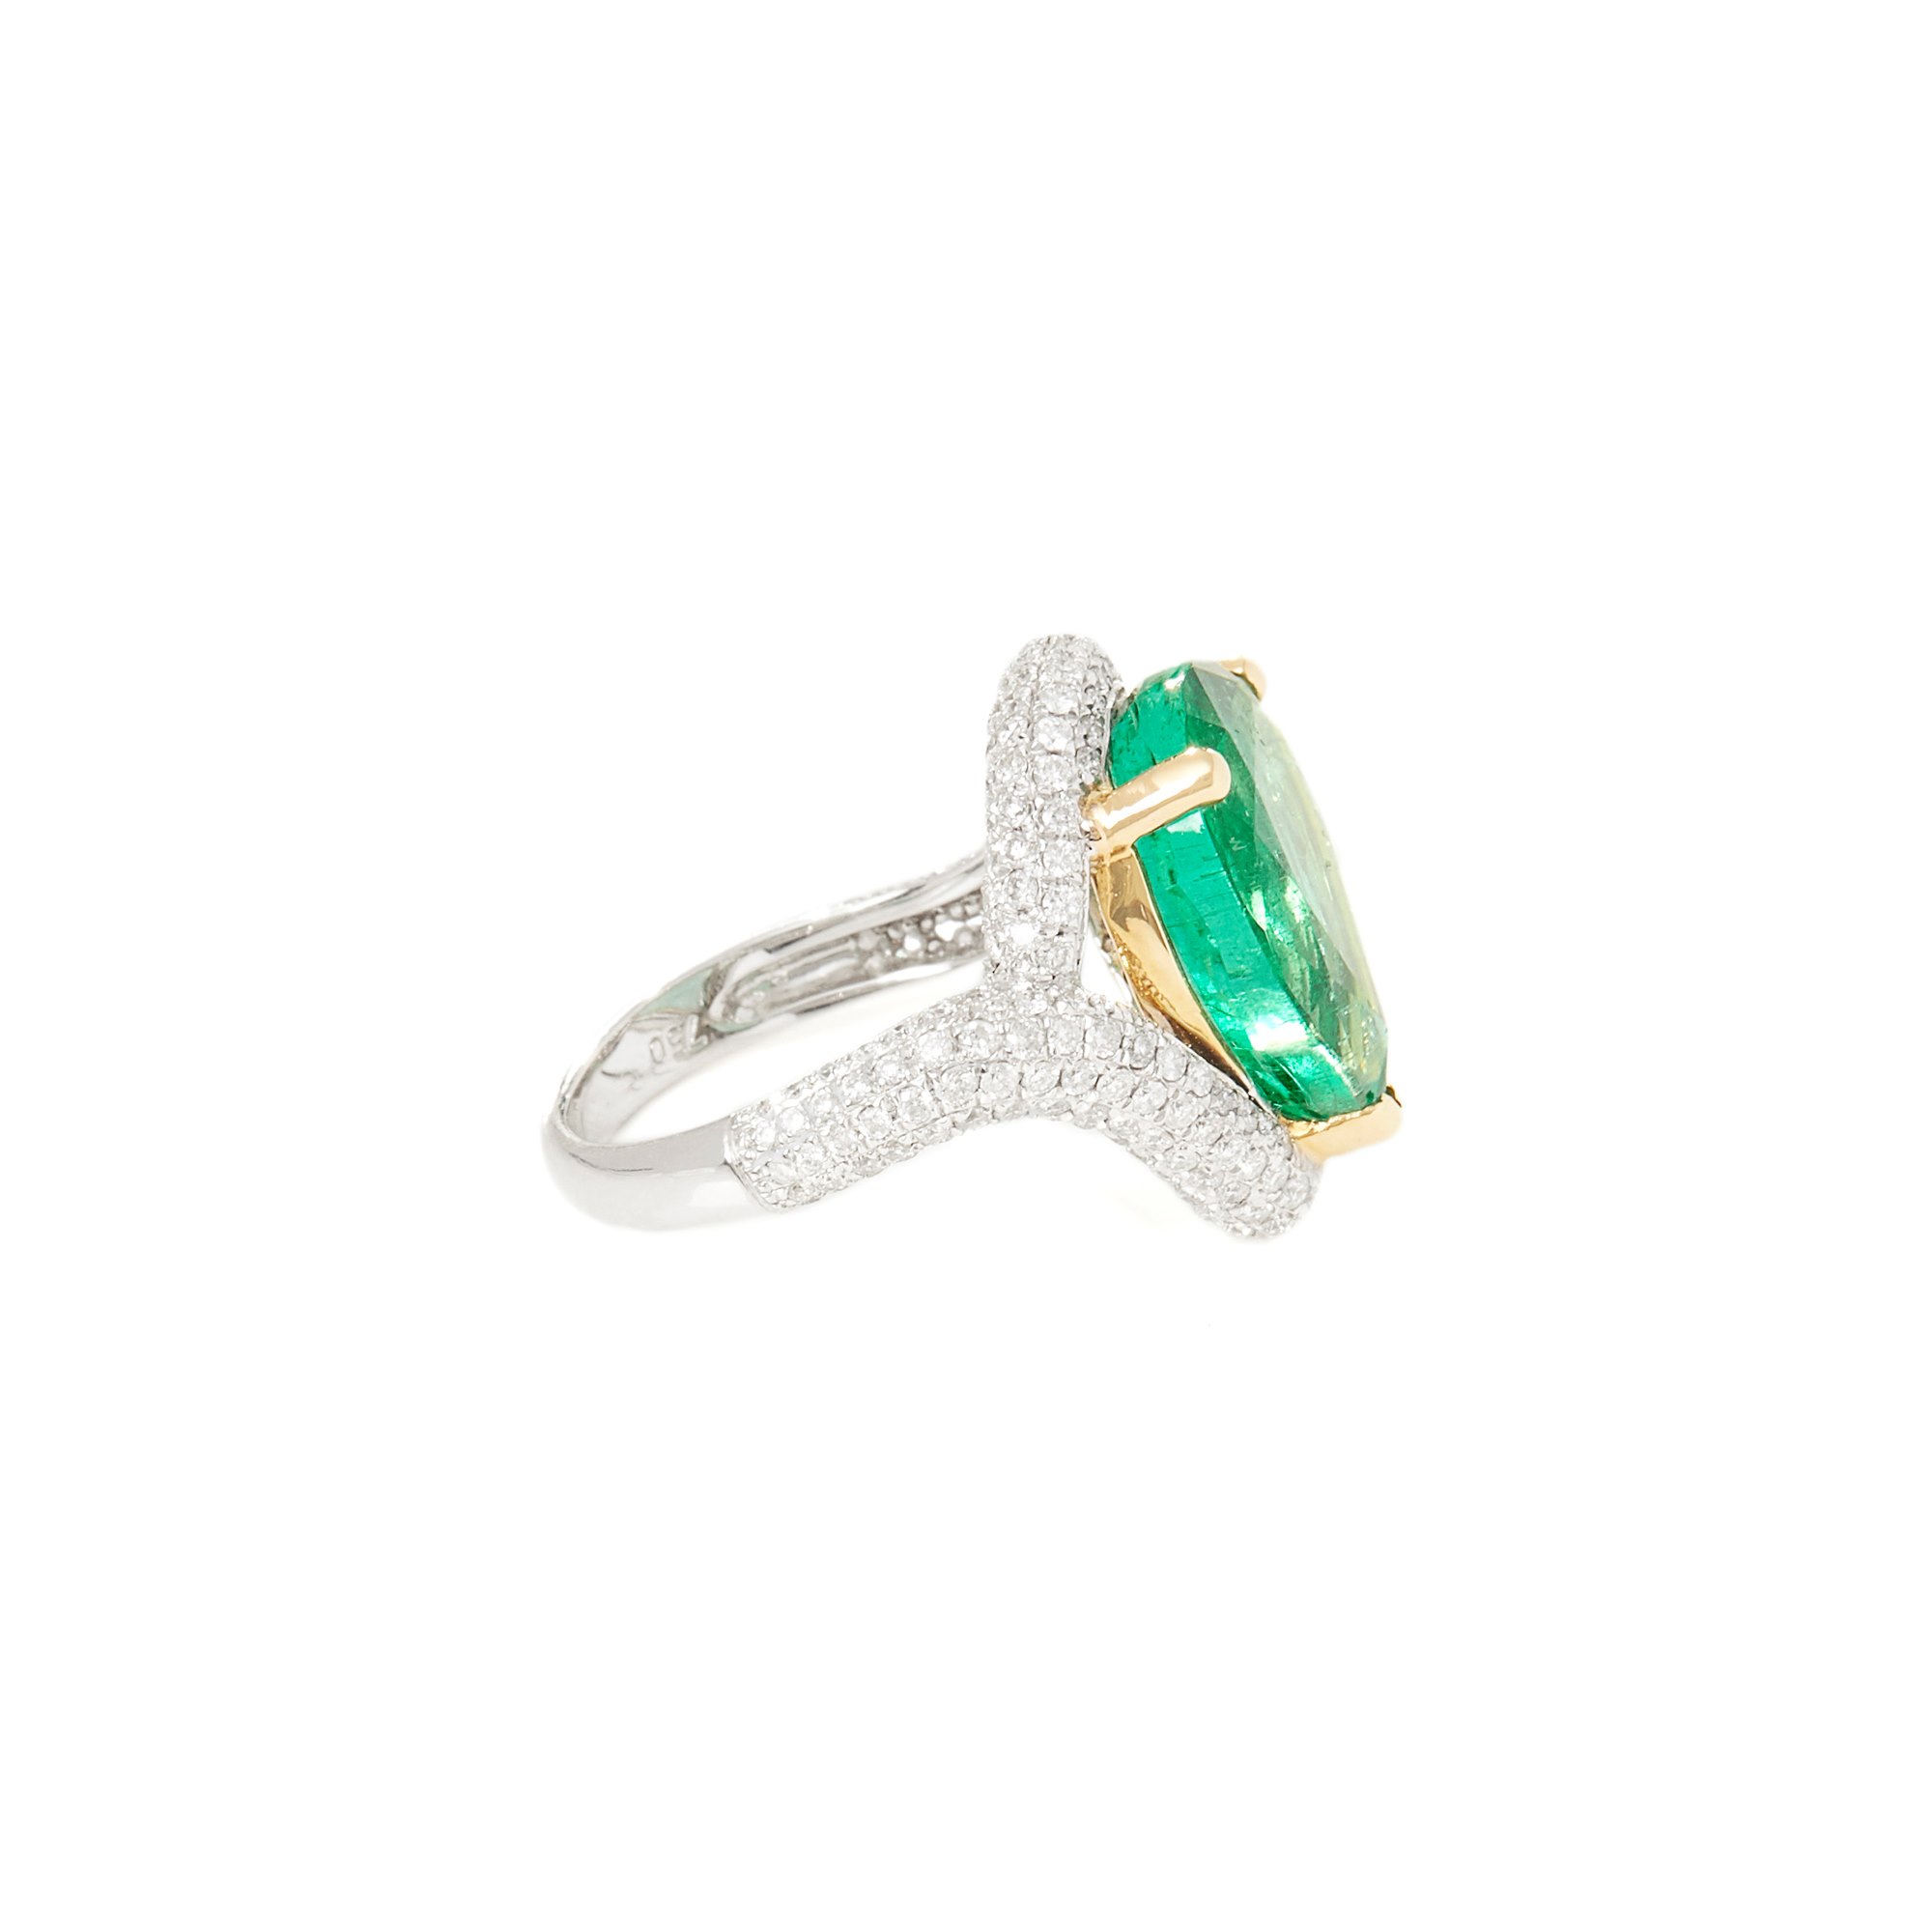 David Jerome Certified 7.04ct Untreated Colombian Emerald and Diamond 18ct Gold Ring